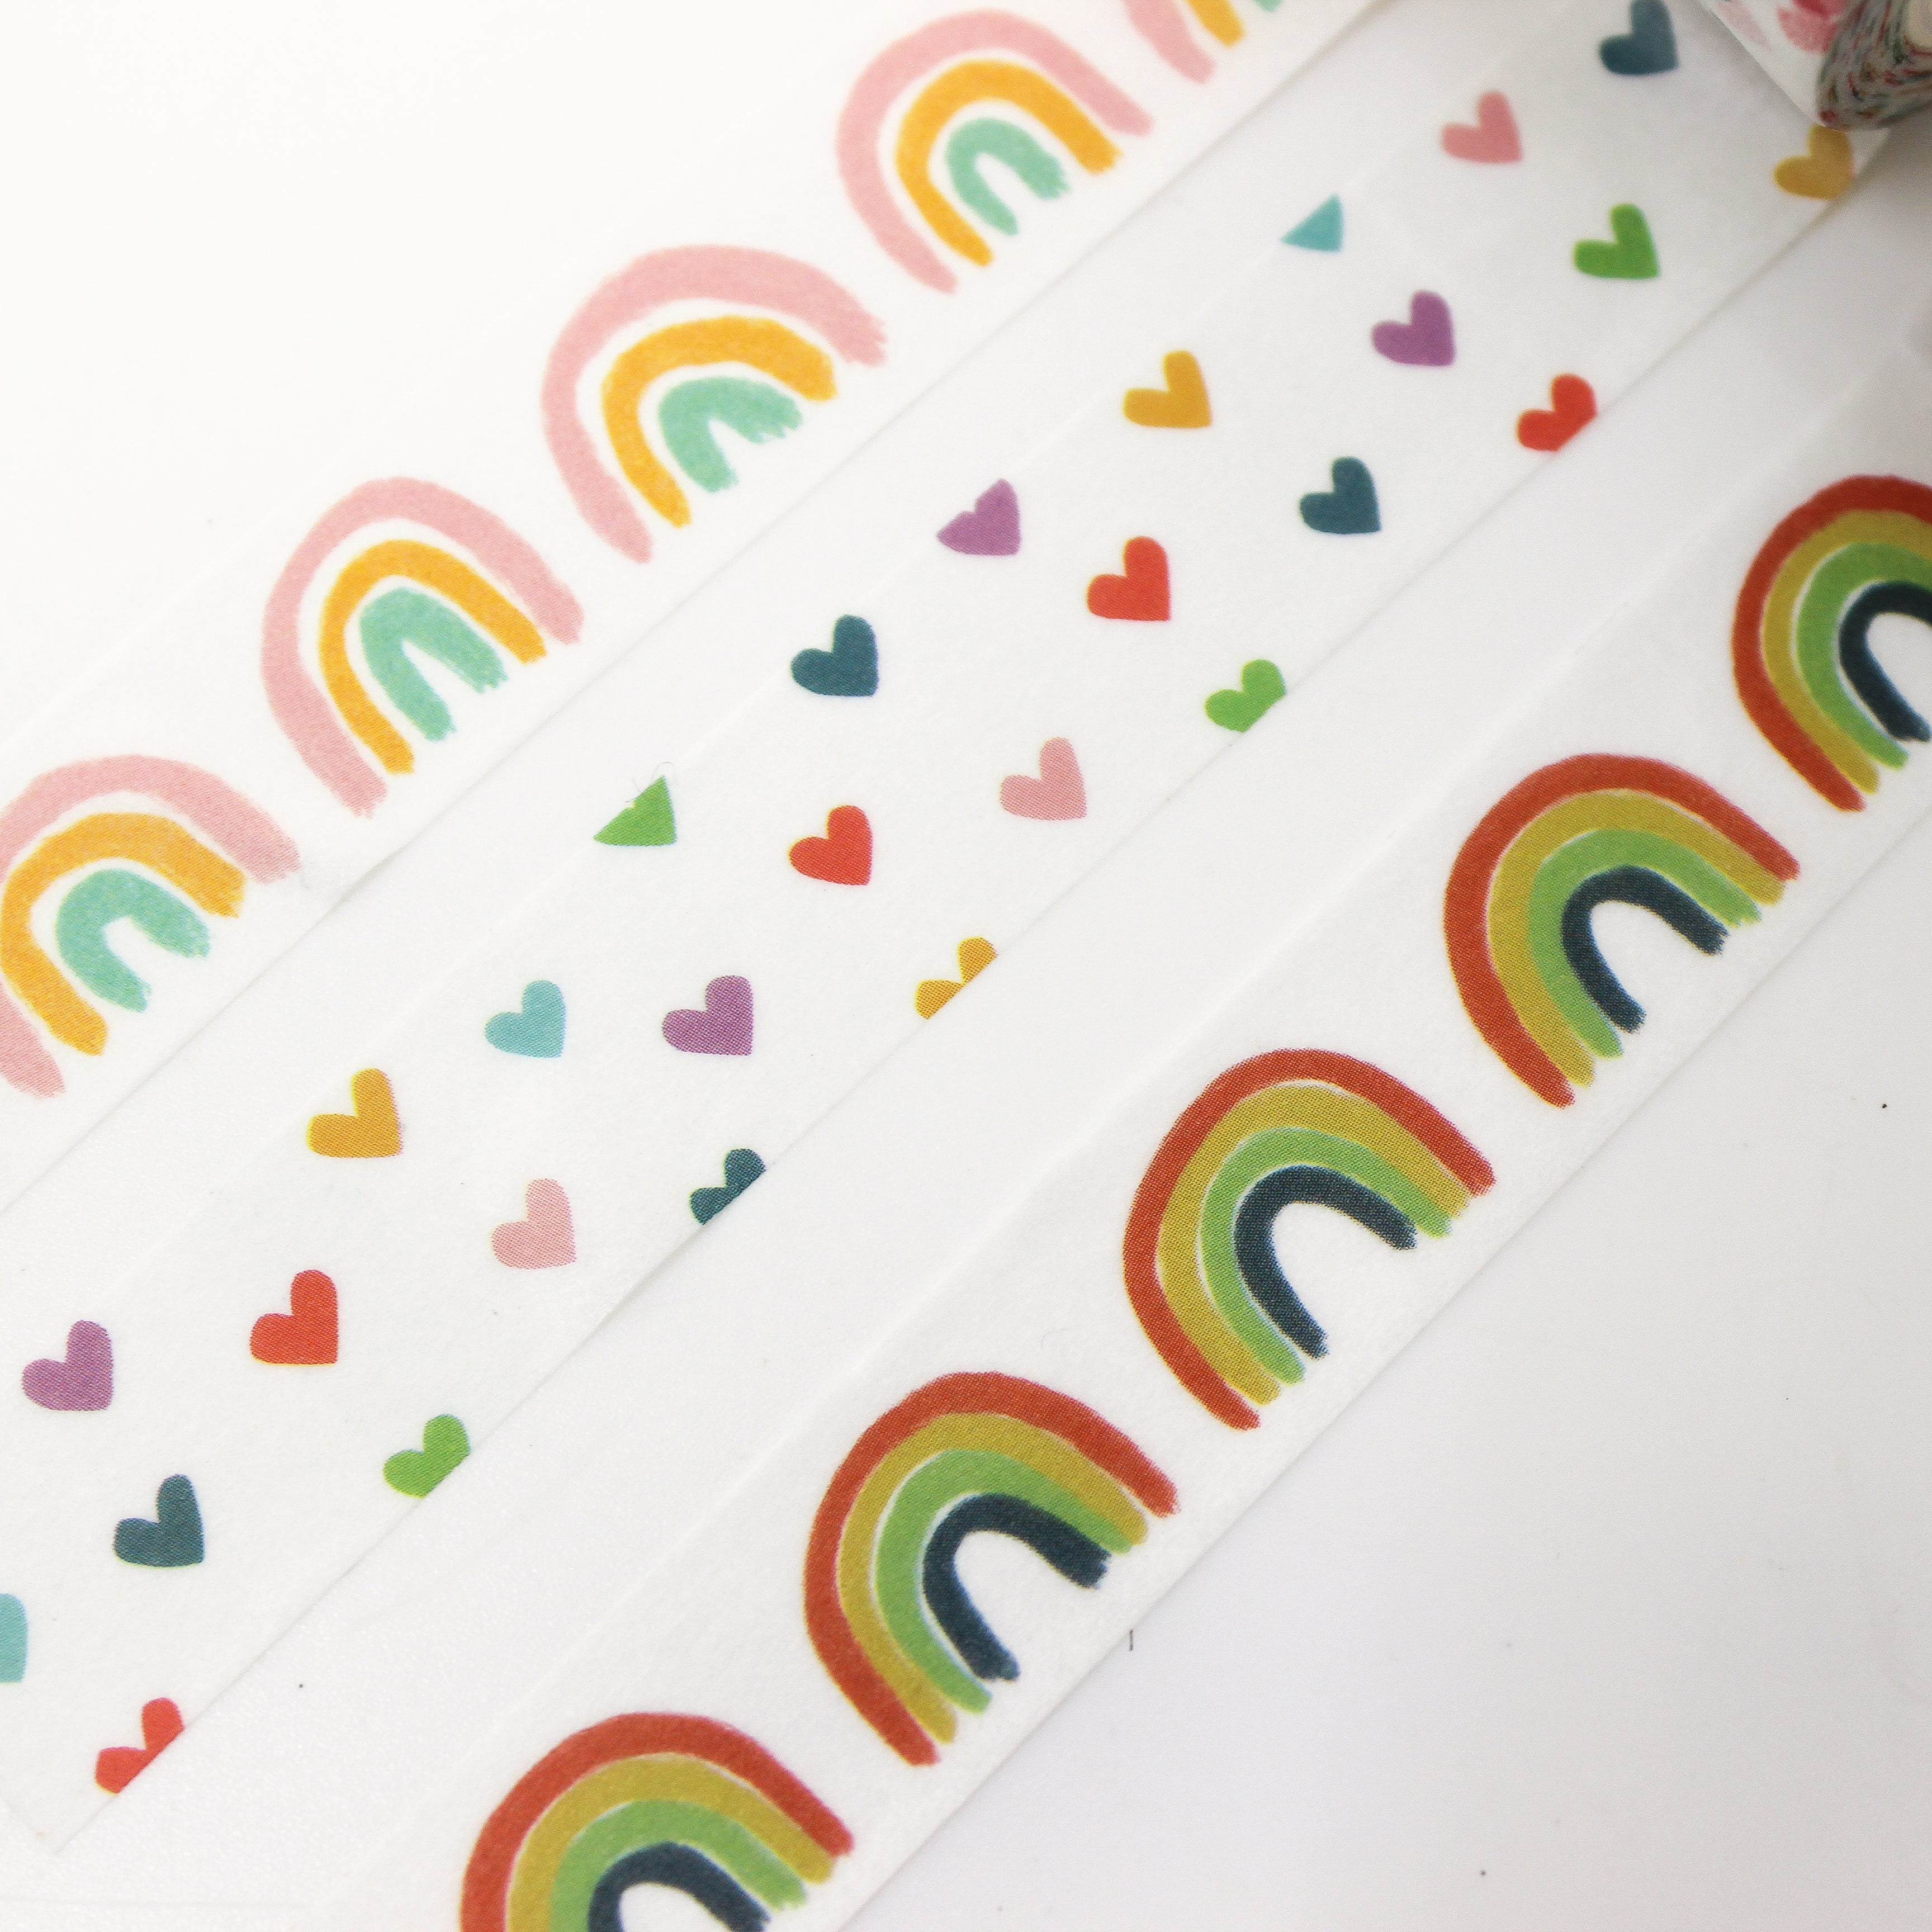 This is a fun and colorful tiny rainbow hearts and rainbow pattern collection of washi tape from BBB Supplies craft and journaling shop.